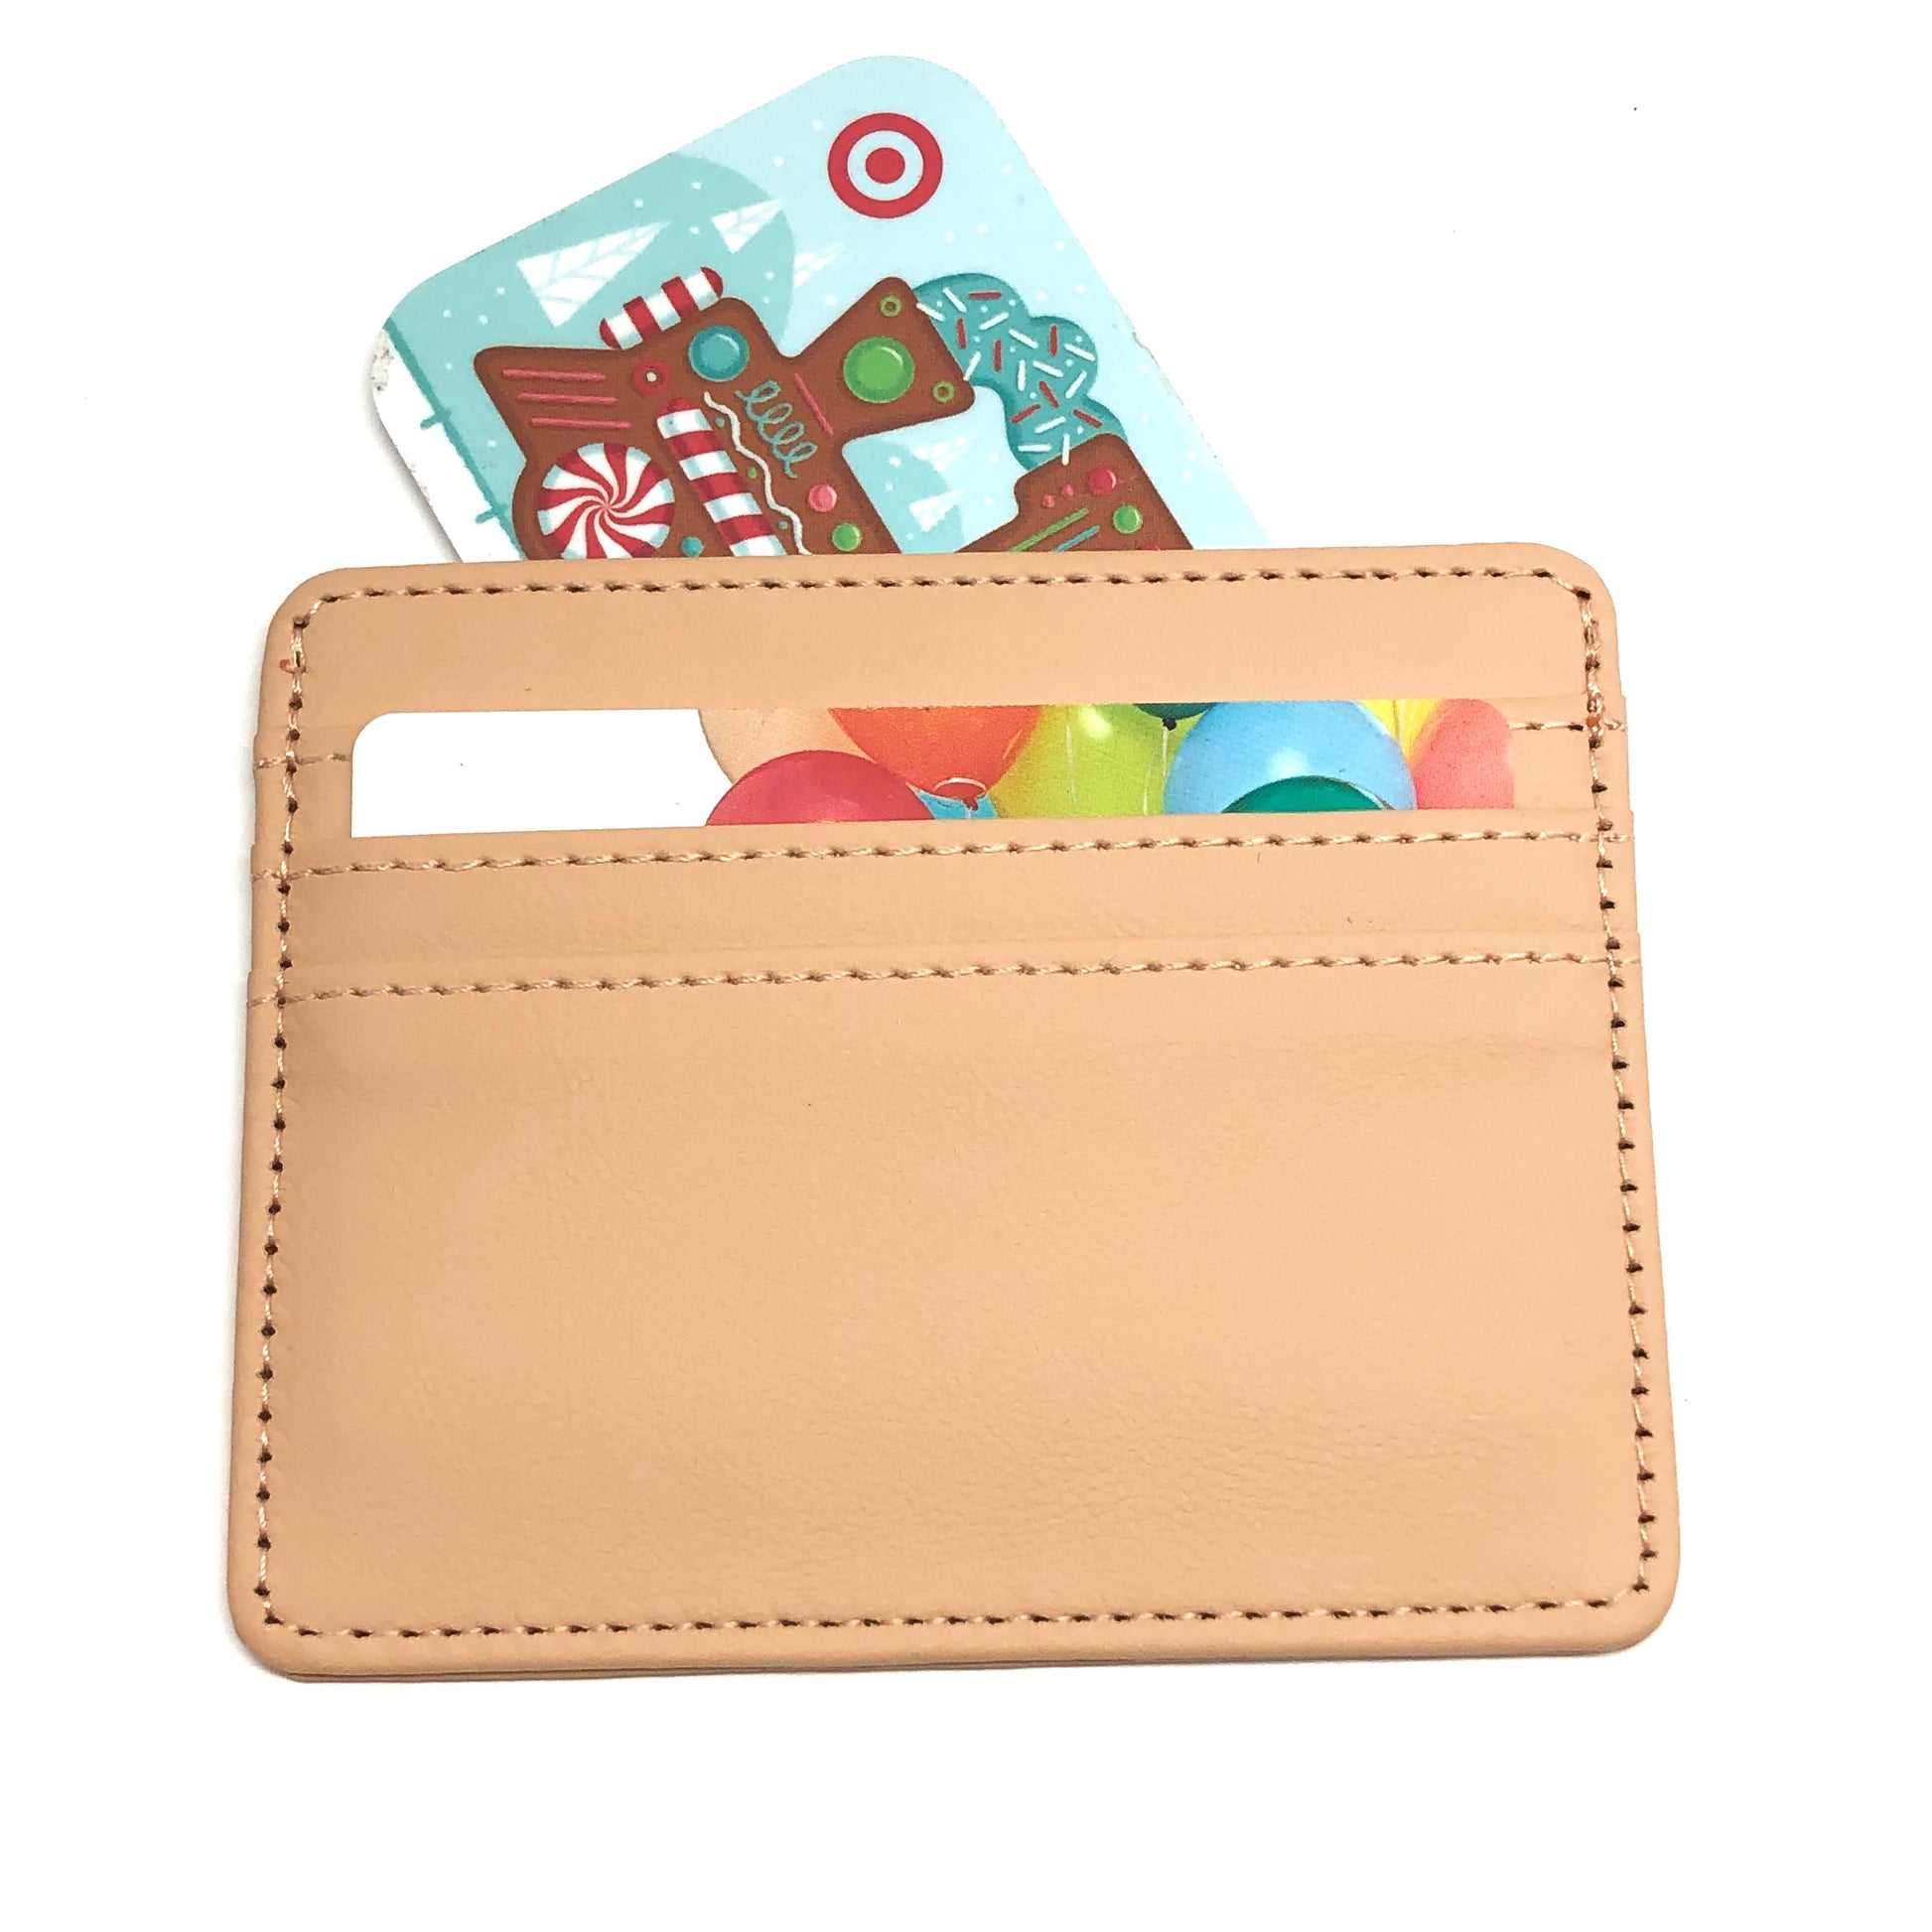 Slim Wallet, Small Camel Tan 4in Faux Leather Thin Wallet / Credit Card Holder